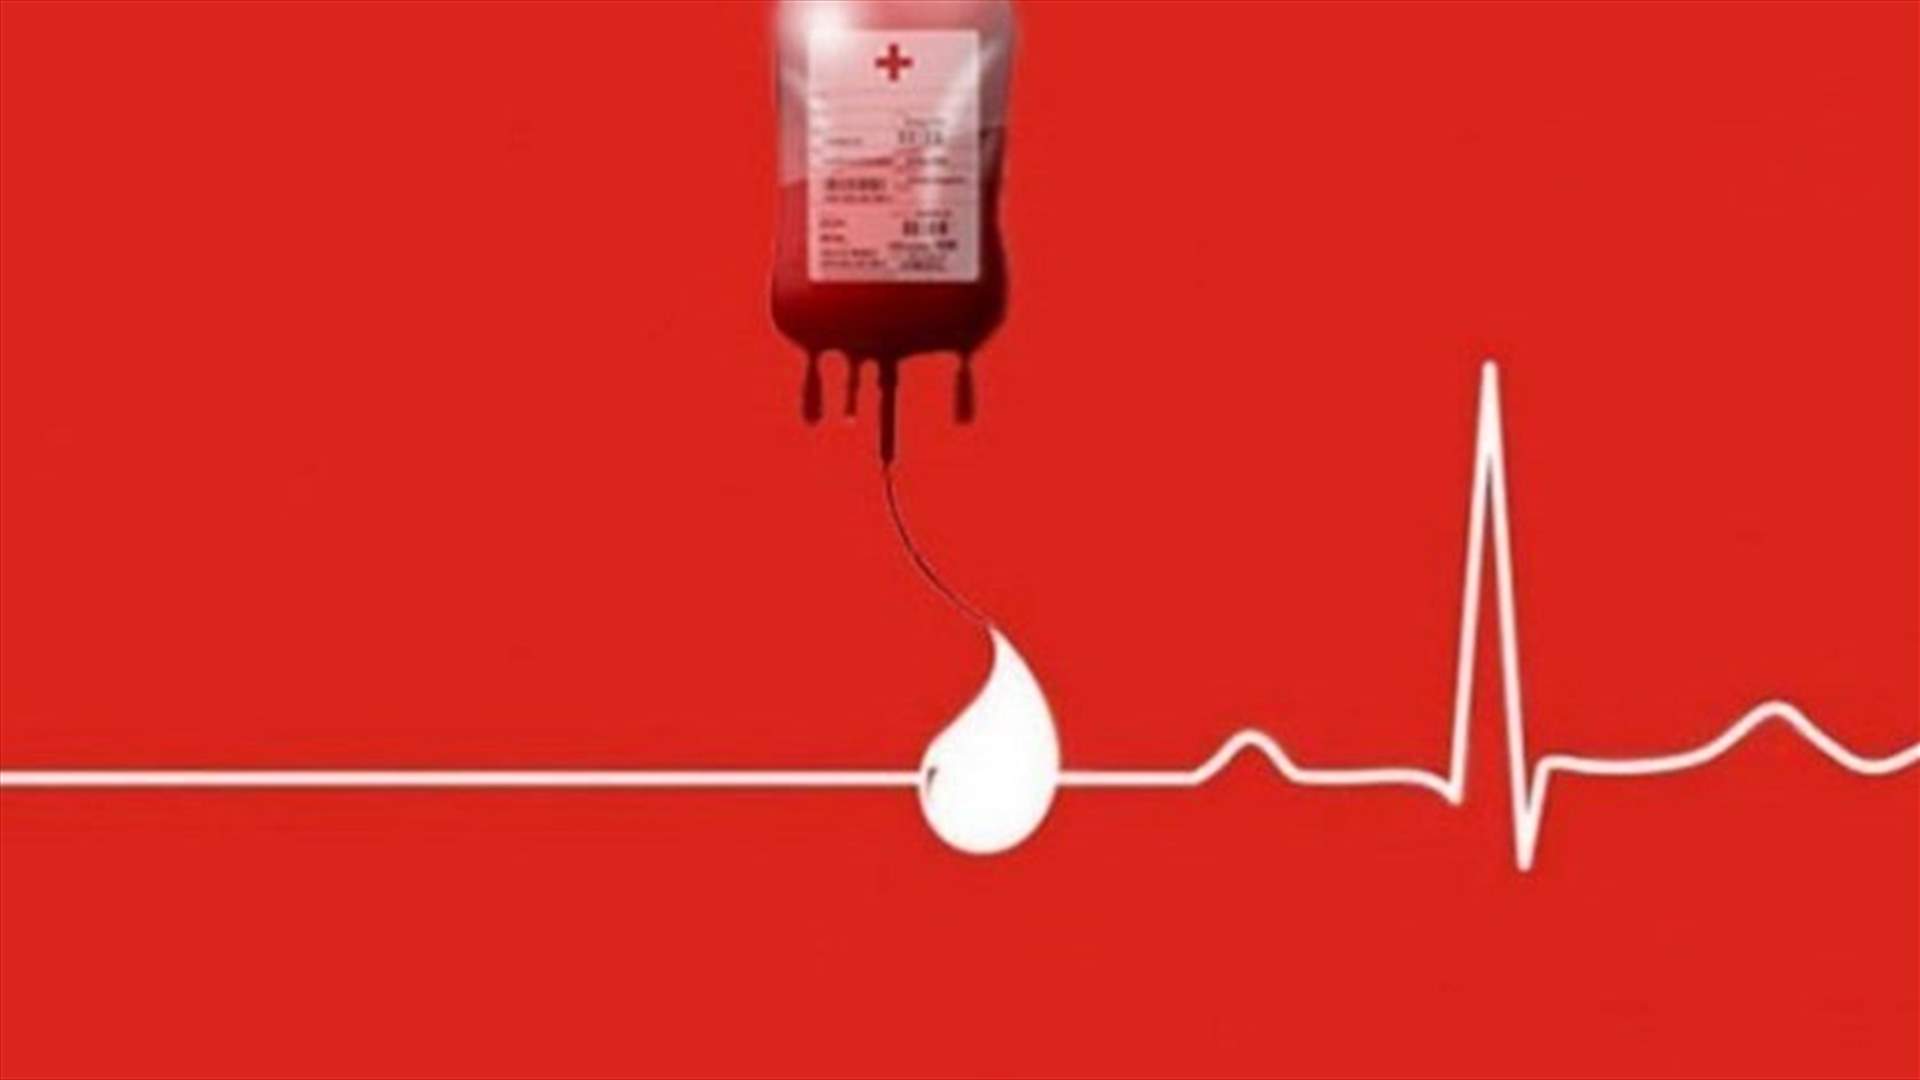 A patient urgently needs 4 units of B+ blood type. To donate, please head to the Red Cross Blood Bank - Tripoli or call: 03/955178 - 03959785